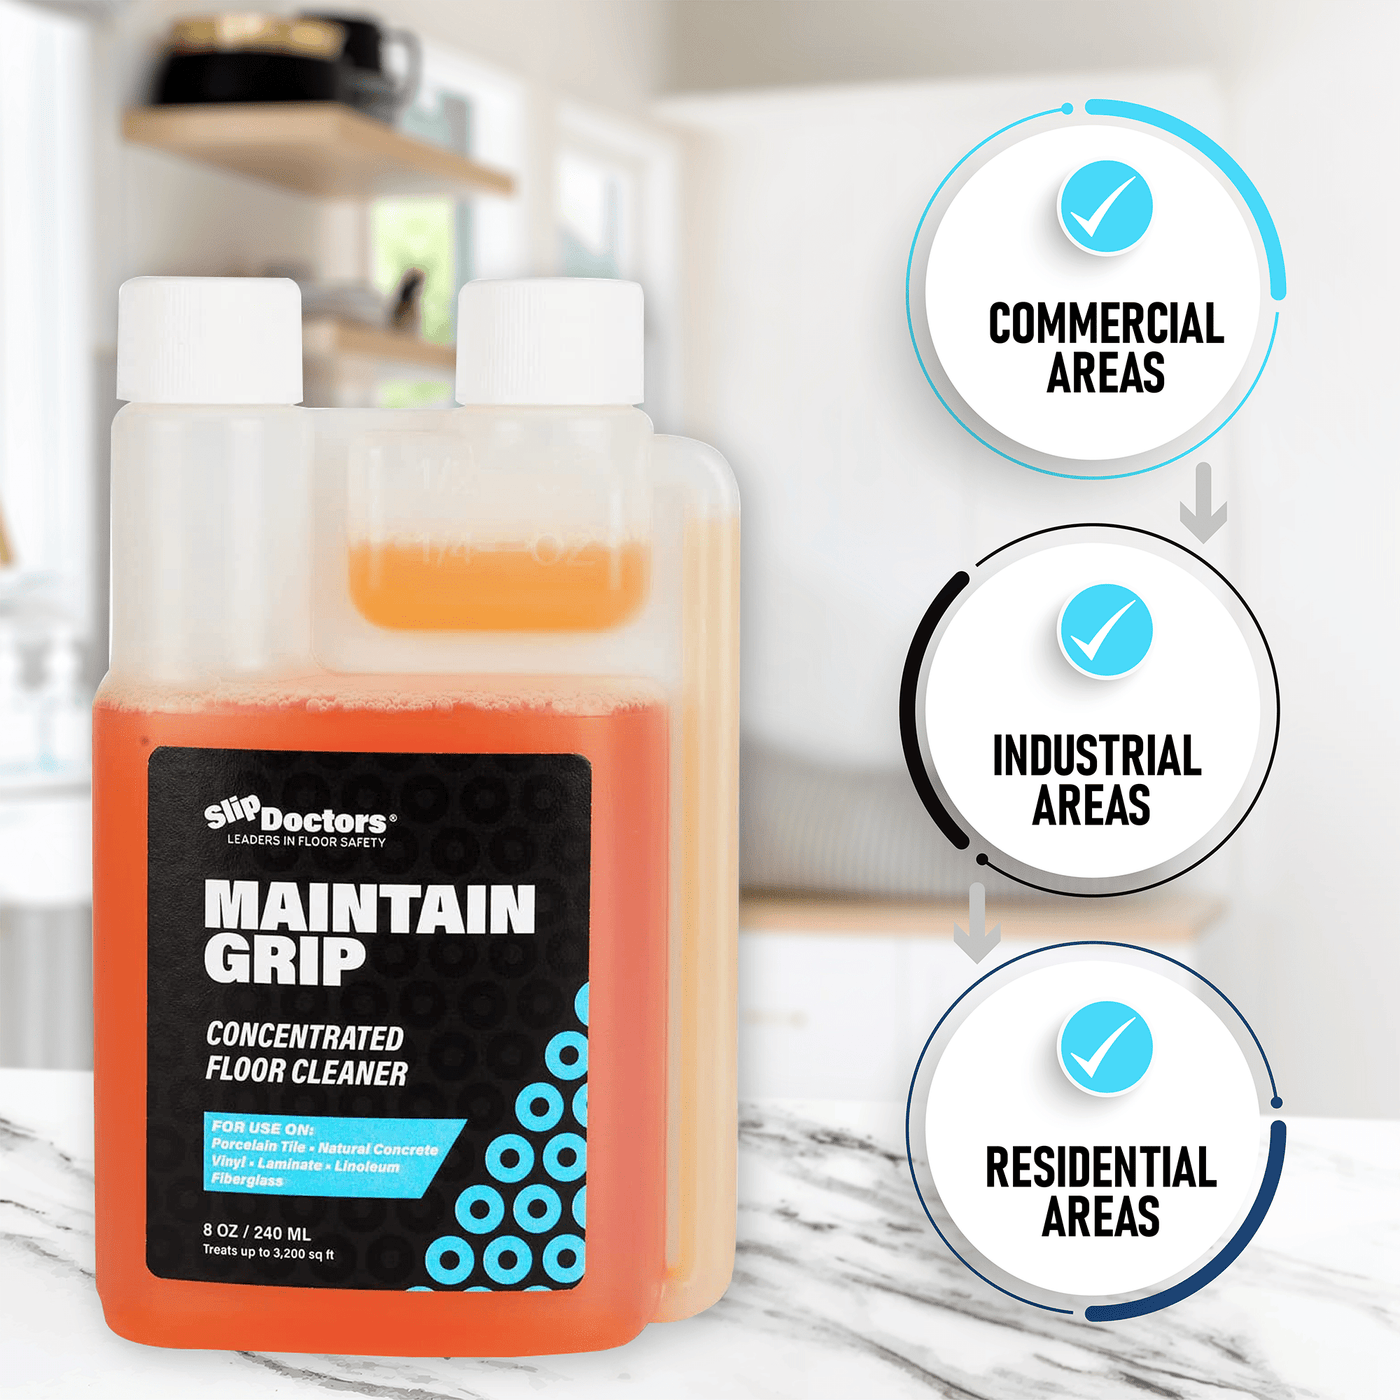 Maintain Grip - Concentrated Cleaner for Hard Surfaces